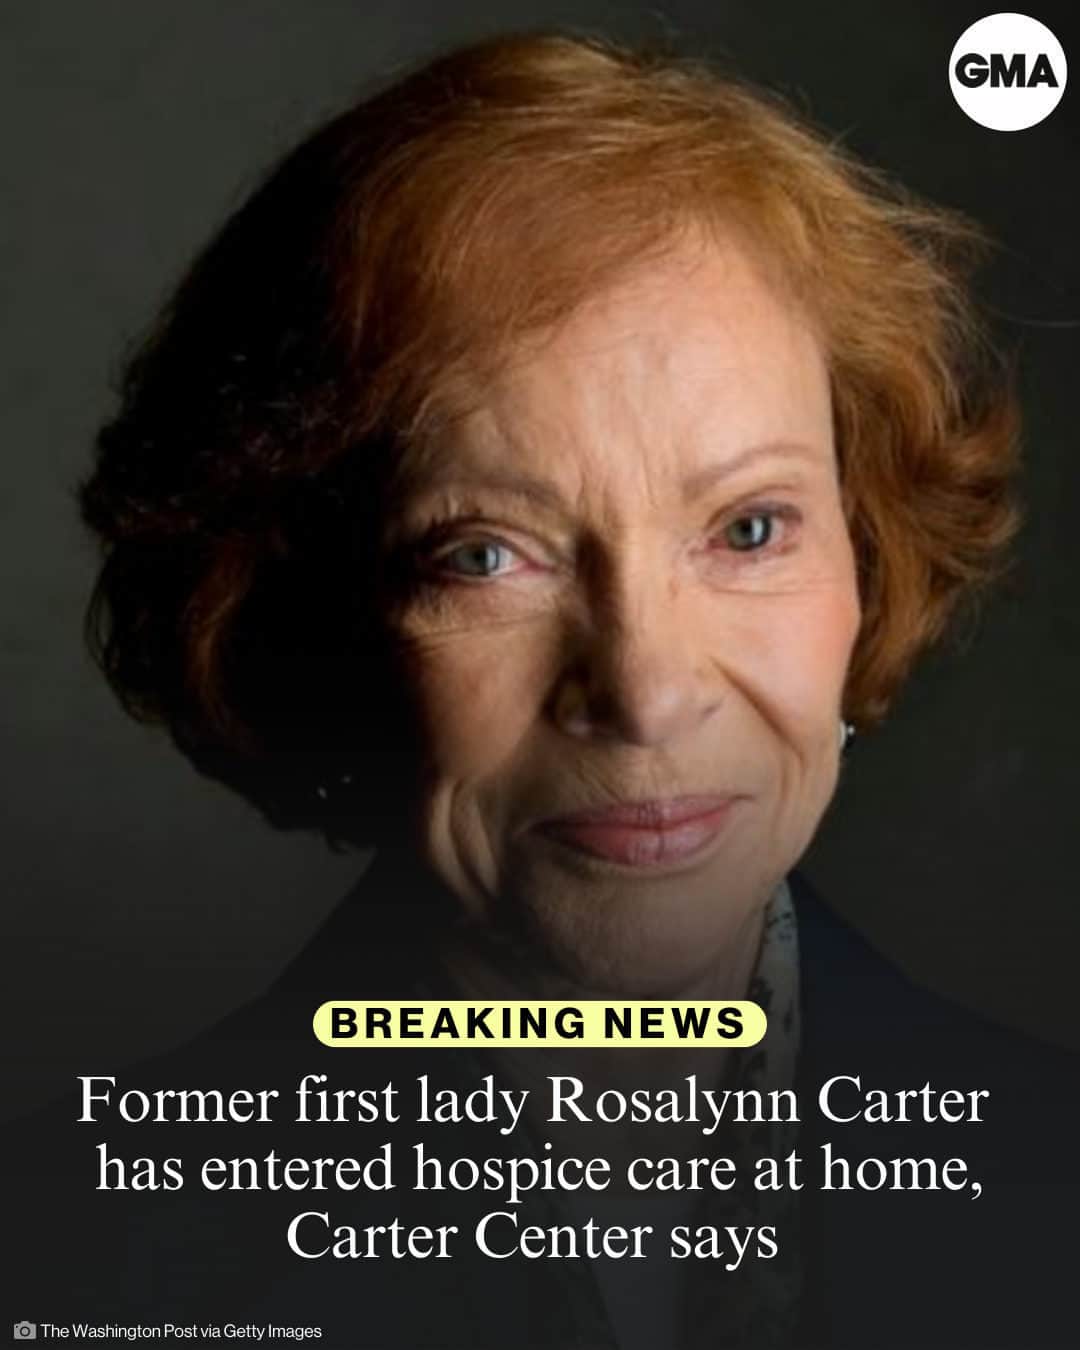 Good Morning Americaのインスタグラム：「Former first lady Rosalynn Carter has entered hospice care at home, nine months after her husband, former President Jimmy Carter, started hospice care.  Rosalynn Carter, 96, and "President Carter are spending time with each other and their family," their grandson said in a statement Friday.  In May, the Carter Center said the former first lady had been diagnosed with dementia.  "She continues to live happily at home with her husband, enjoying spring in Plains, [Georgia], and visits with loved ones," The Carter Center said in a statement at the time.  More at link in bio.」